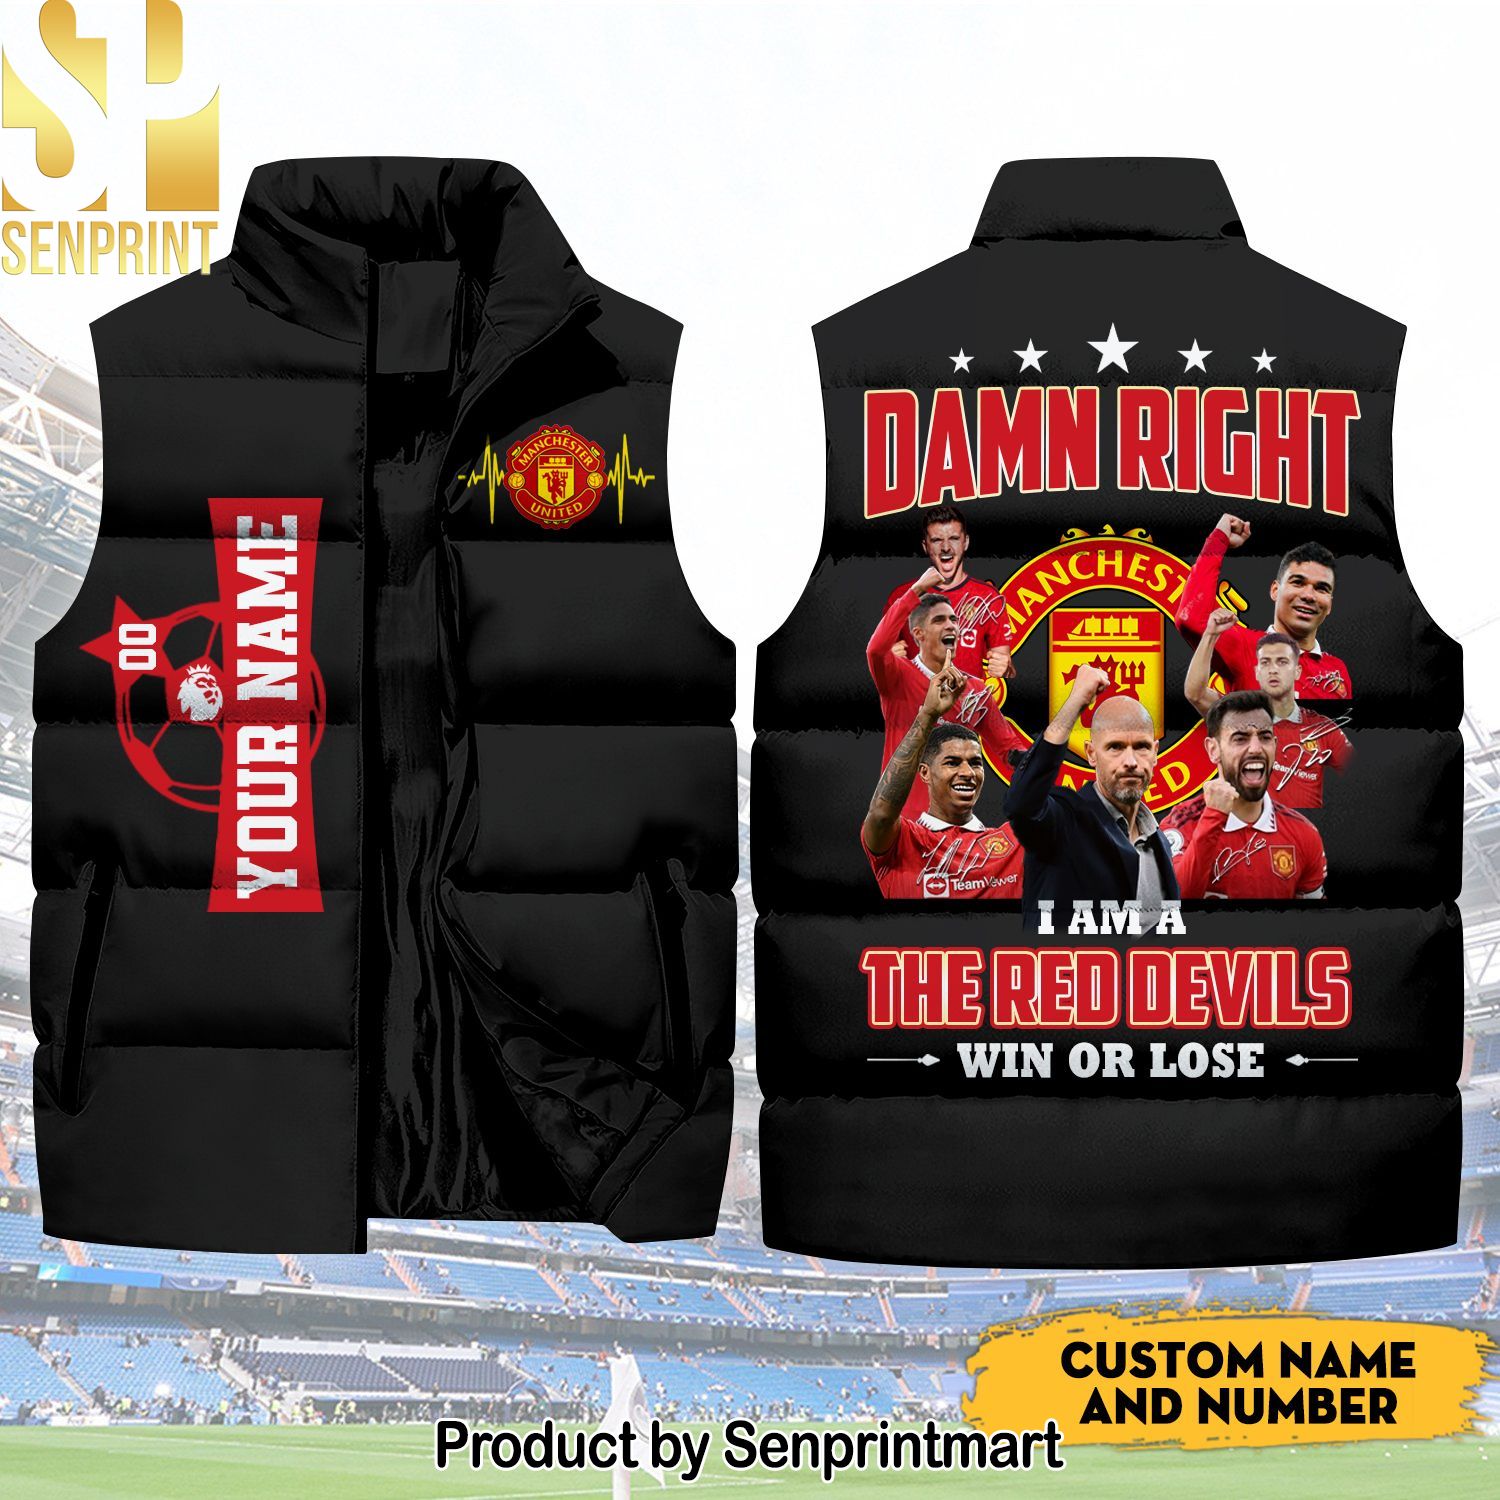 Damn Right I Am The Red Devils Manchester United And Number New Outfit Sleeveless Jacket